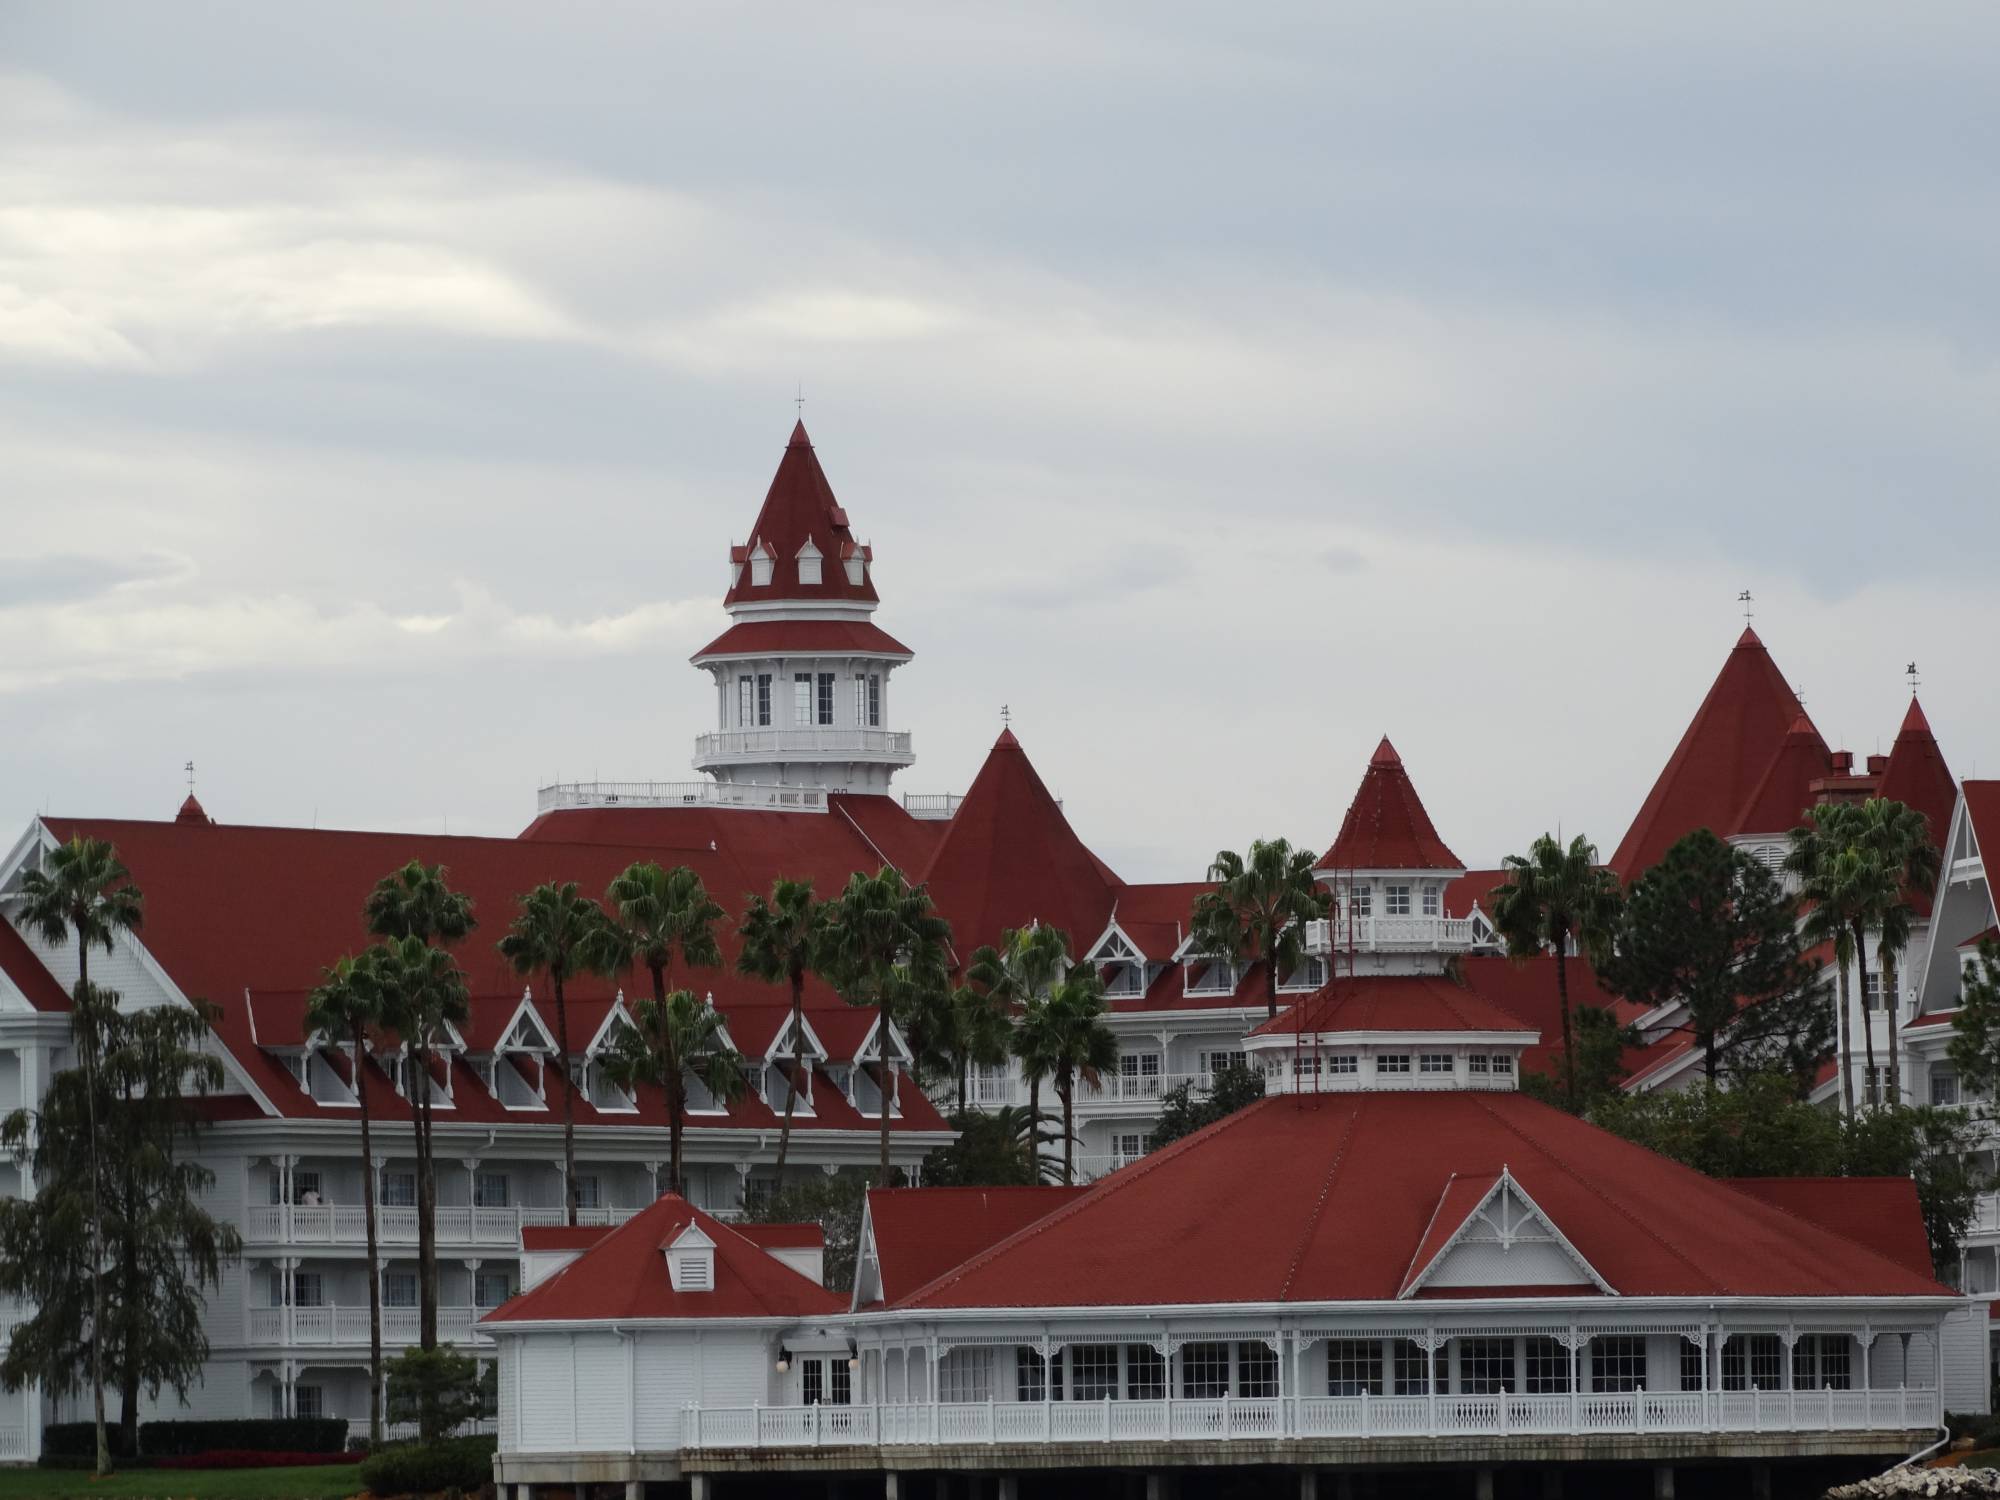 The Grand Floridian as seen from the Seven Seas Lagoon.